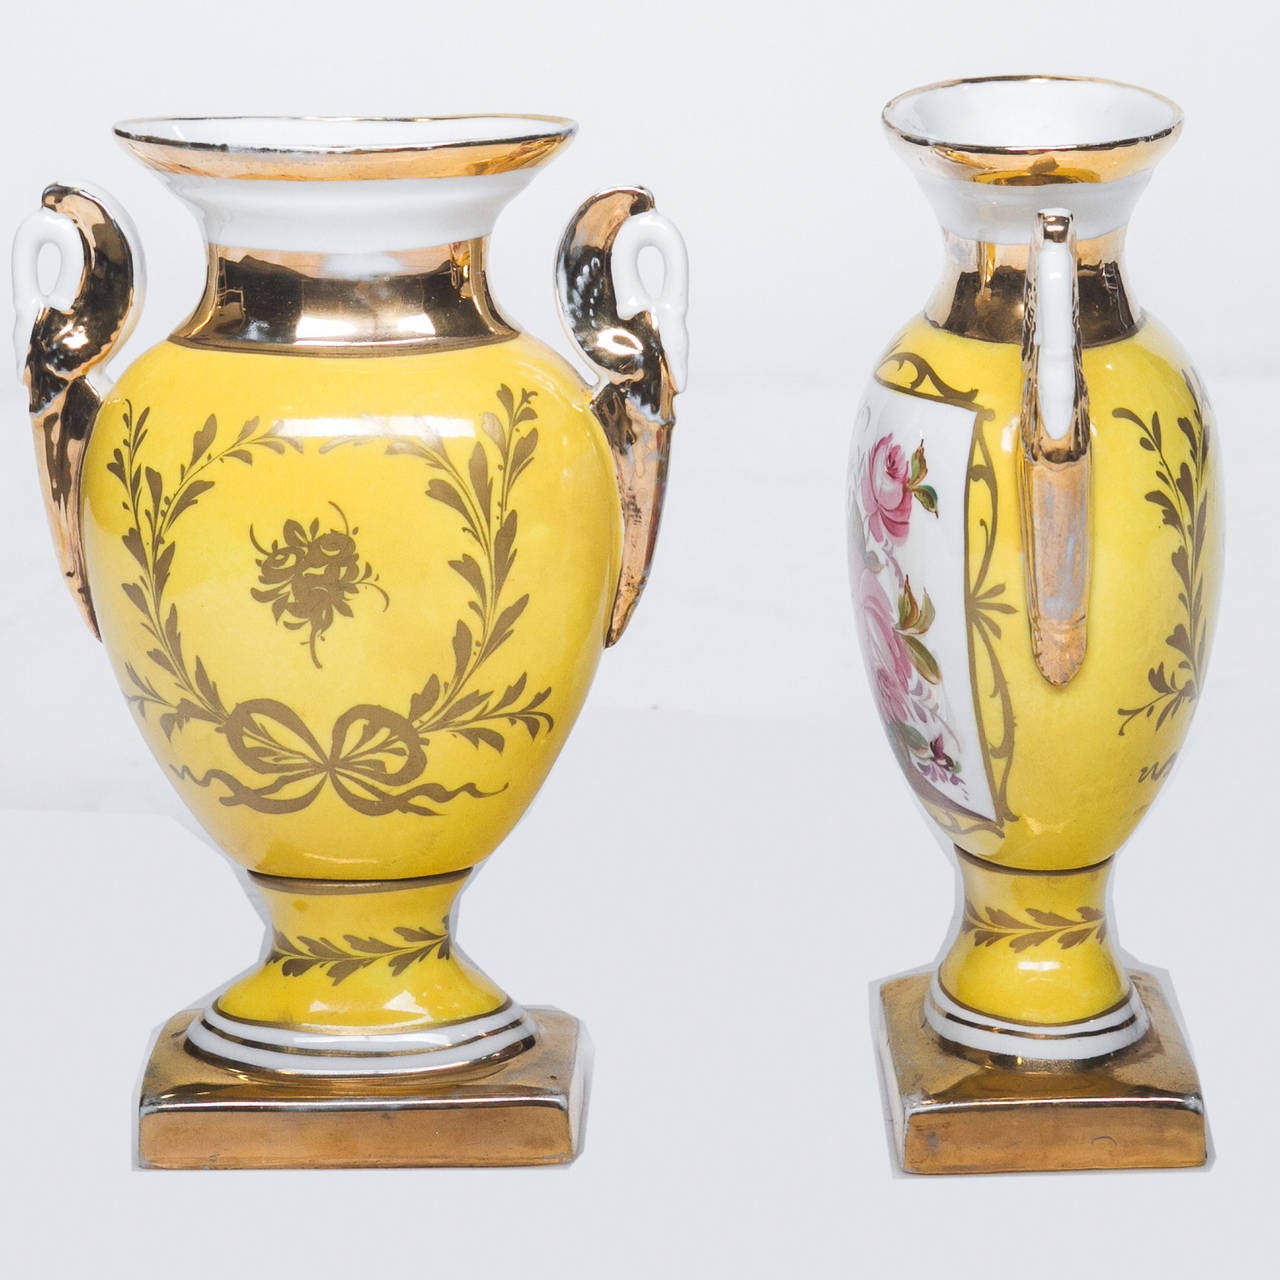 An exceptional pair of signed Old Paris urns with a base color of primrose yellow. Nice floral center and gold accents. Very nice swan neck handles. Made in France signed “Le Tallec Paris.” These are of high quality porcelain and hand painting,